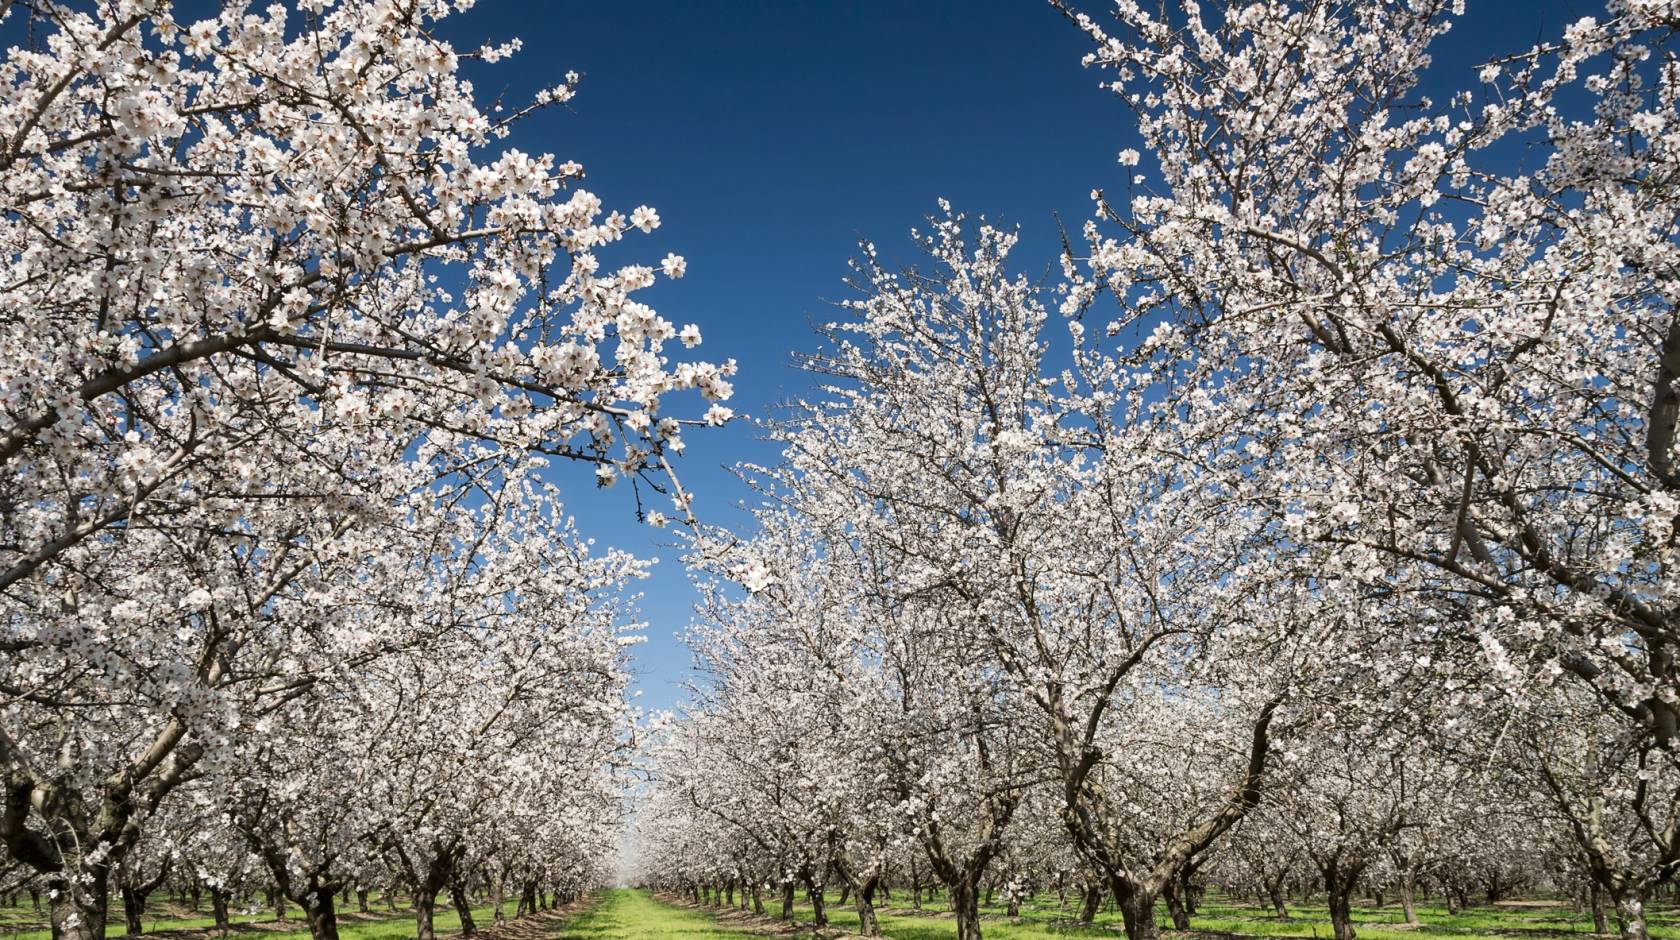 An almond orchard in full bloom